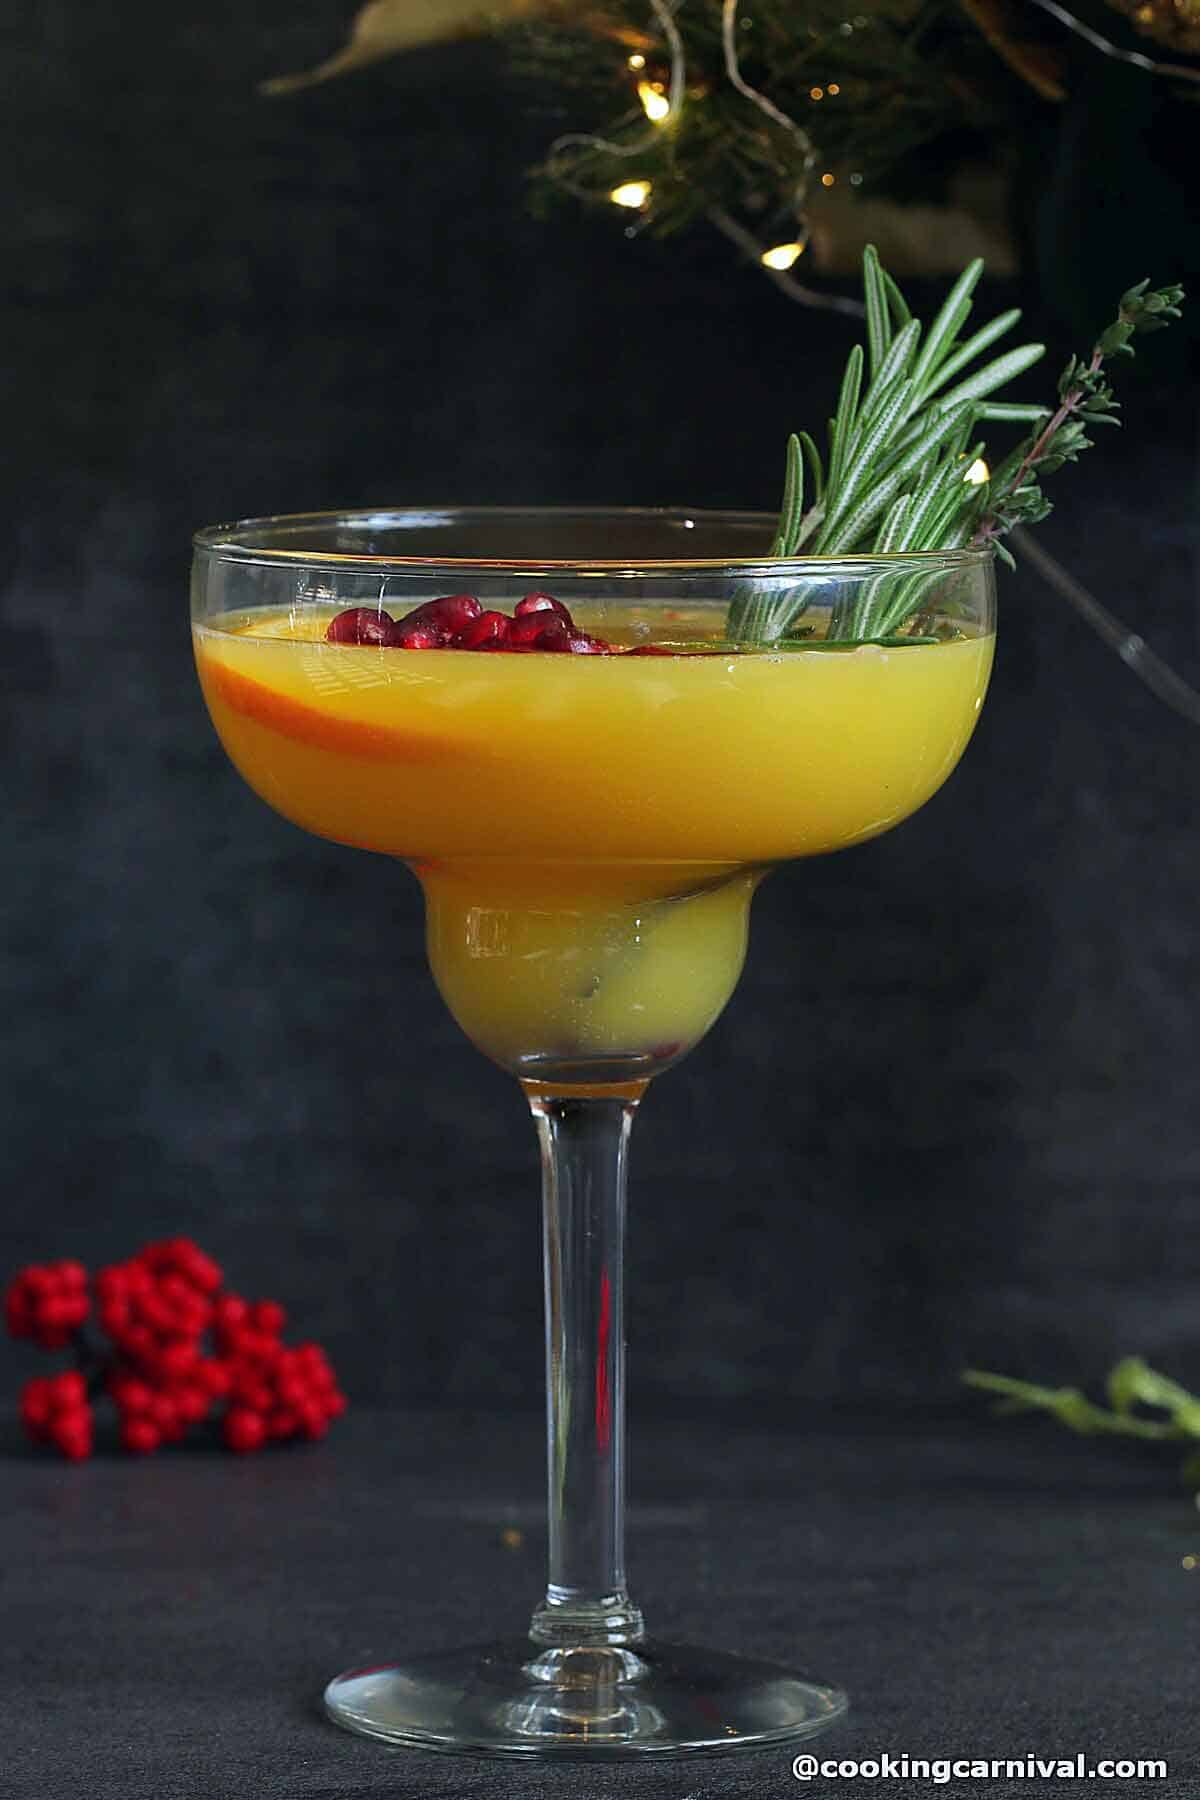 Orange mocktail in a glass garnished with rosemary and thyme.